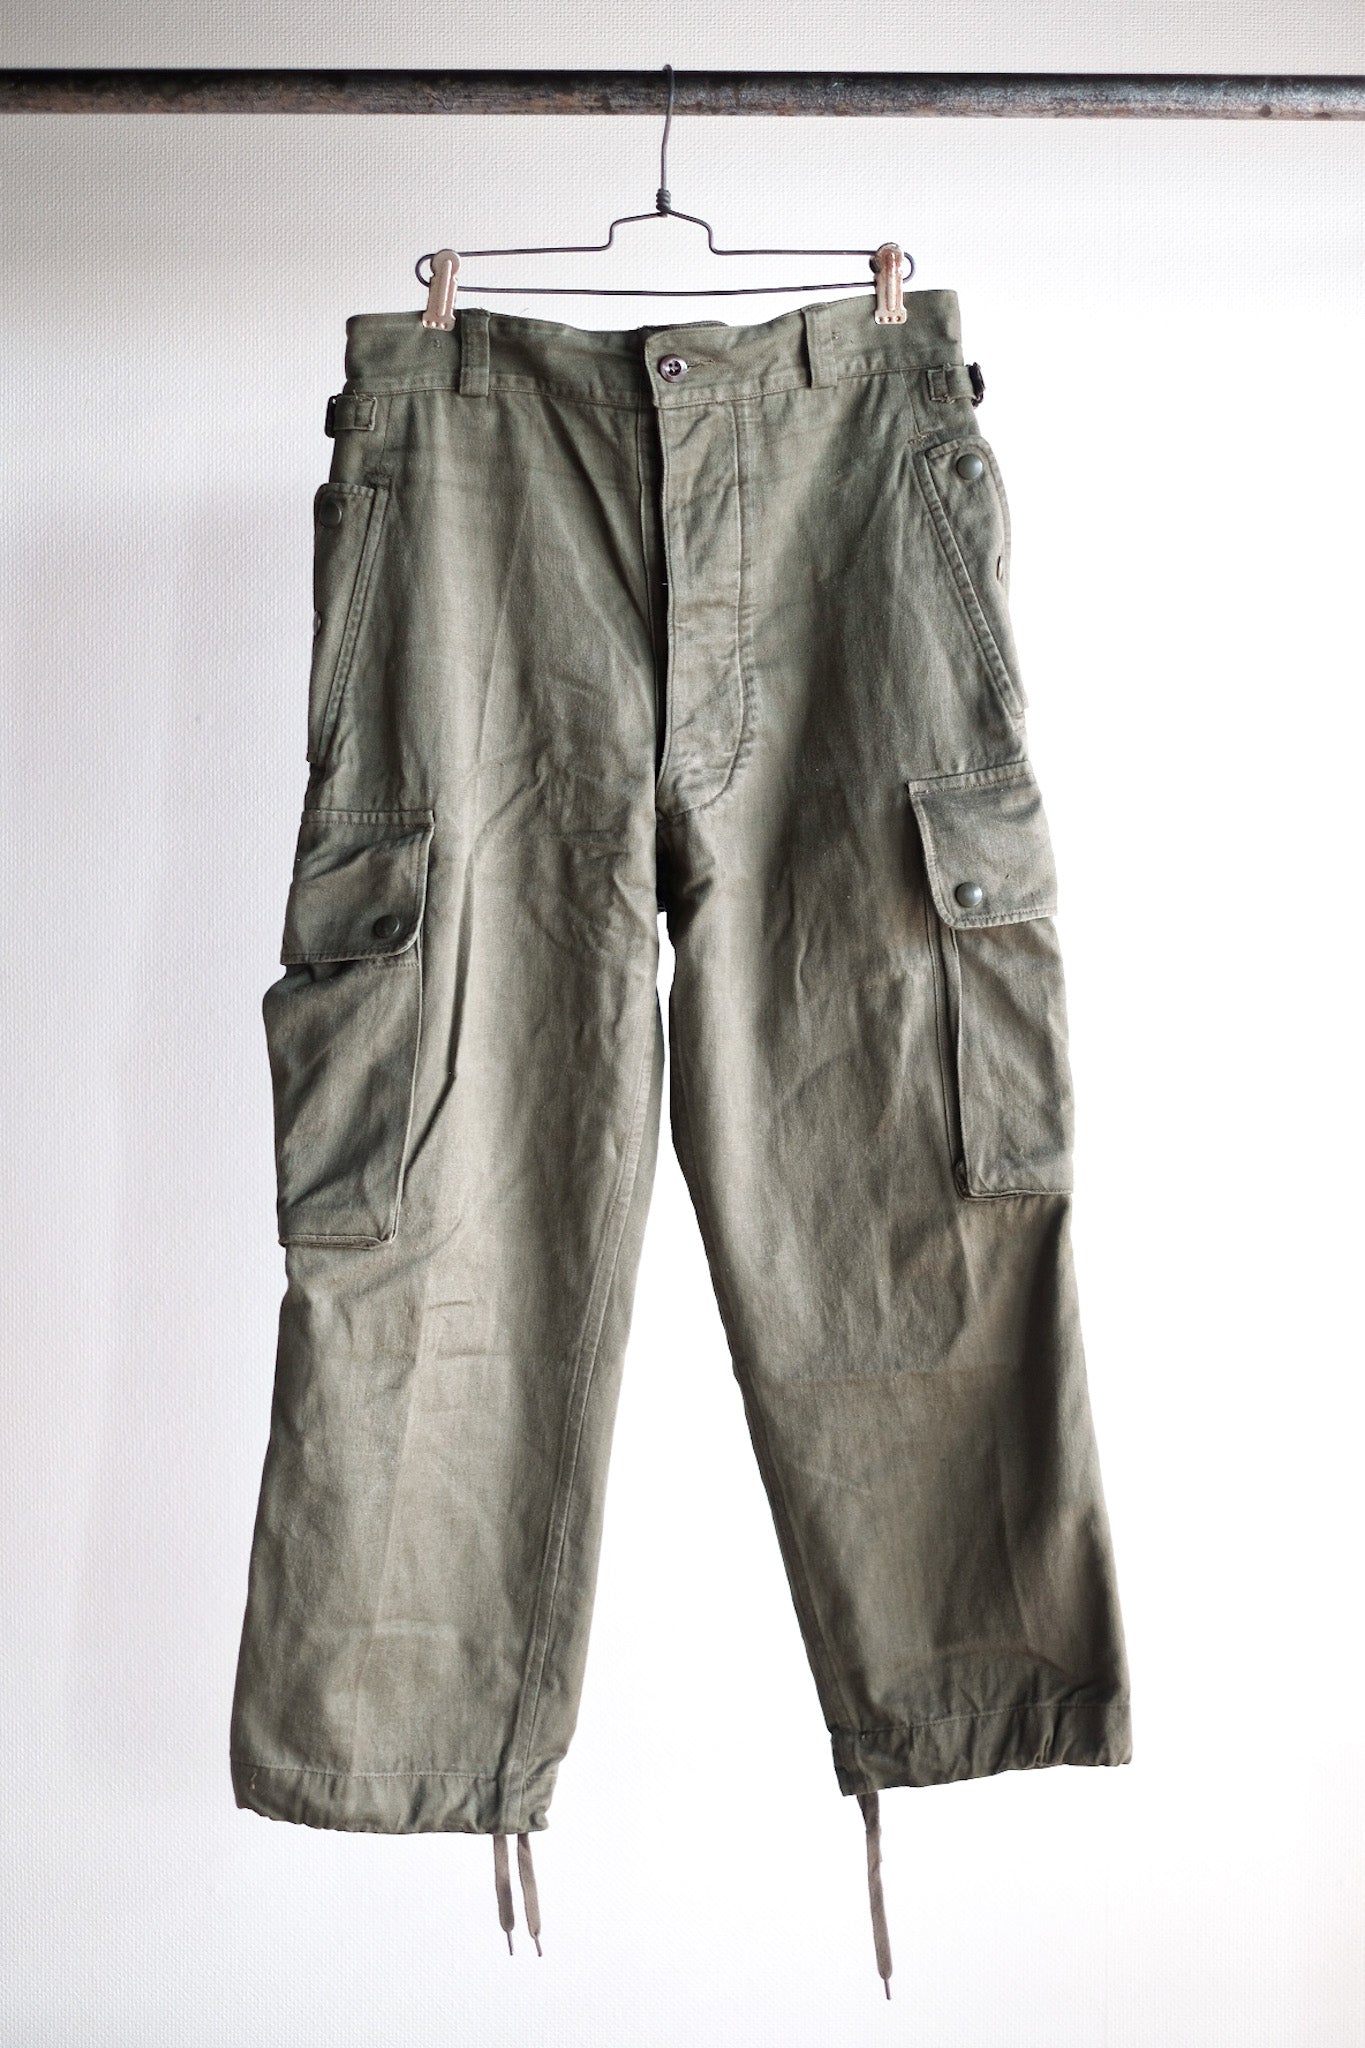 [~ 60's] French Army Tap47/56 ParaTrooper Trousers Size.11